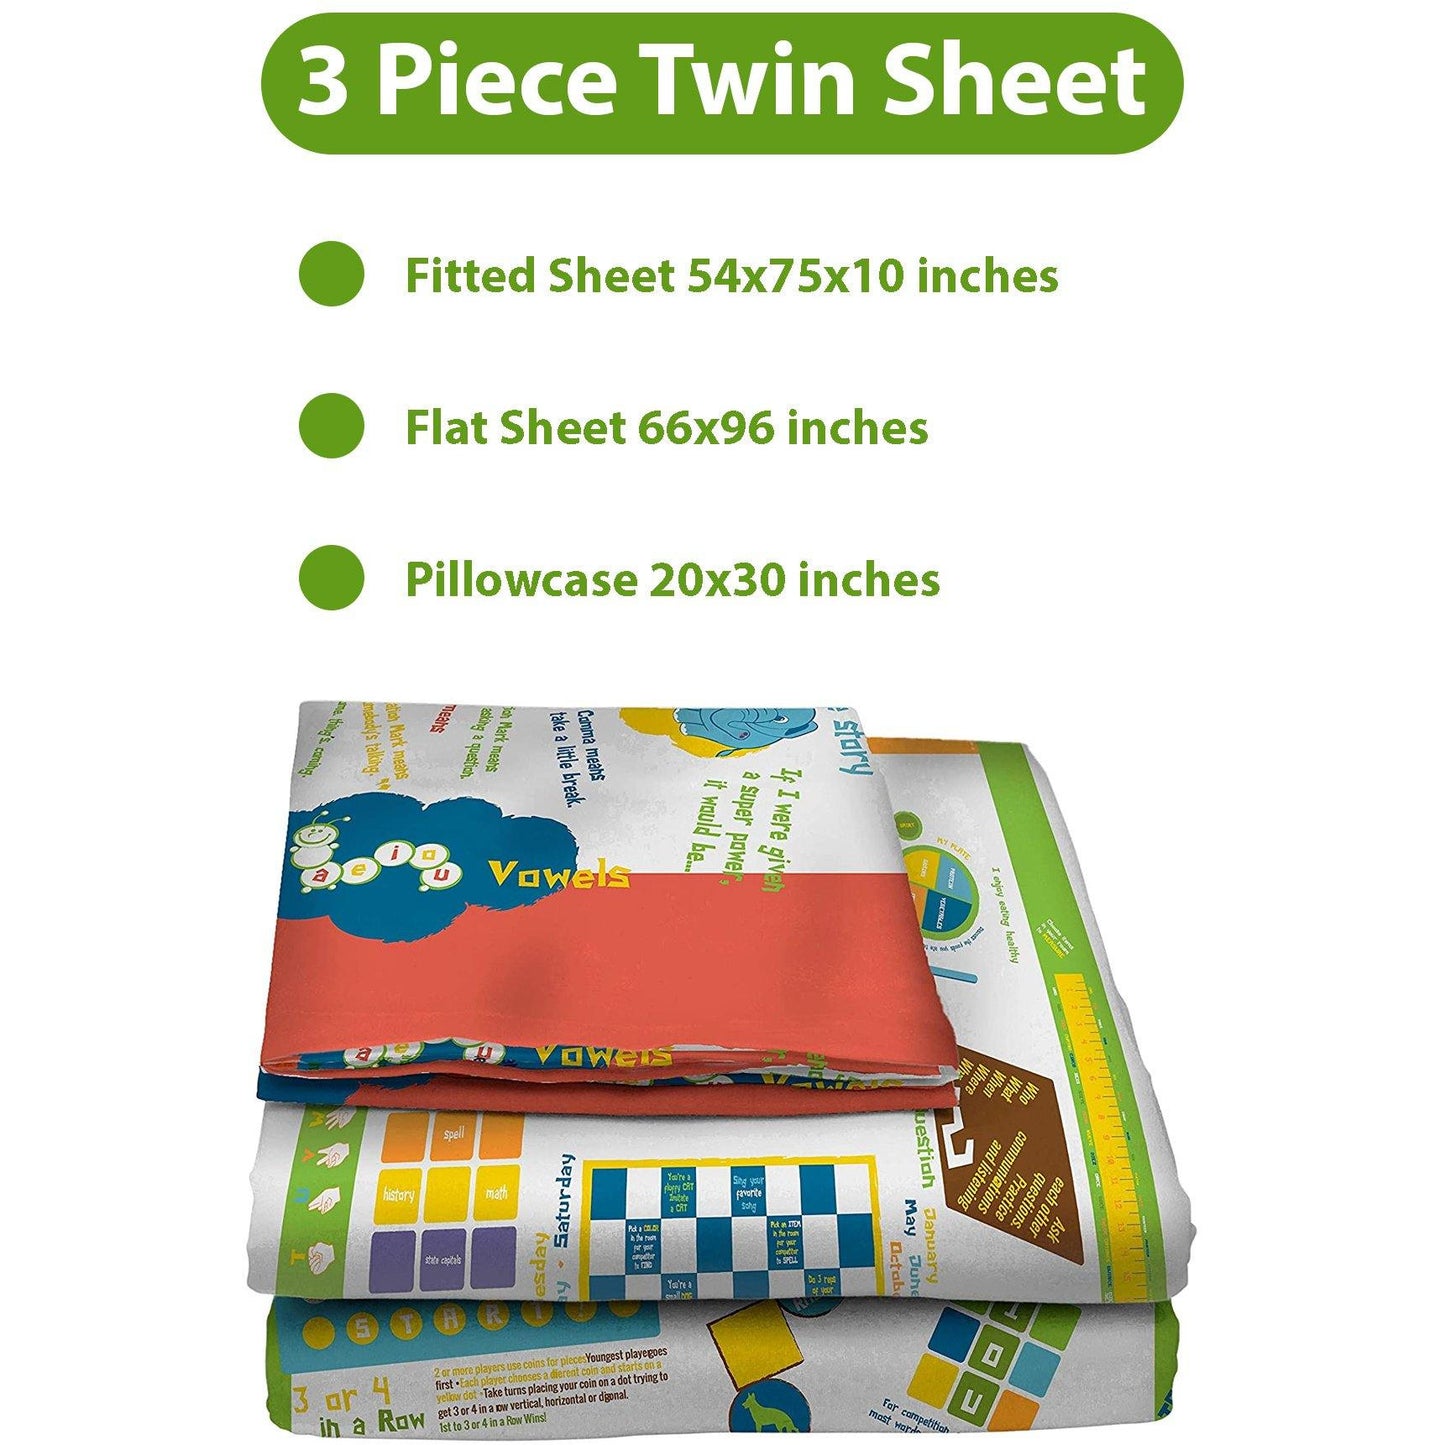 Playtime Bed Sheets Twin Set! Over 60 Fun Interactive Games & Puzzles. Soft Microfiber 3-Piece Set (Gender-Neutral). - Playtime Bed Sheets and Slumber Bags